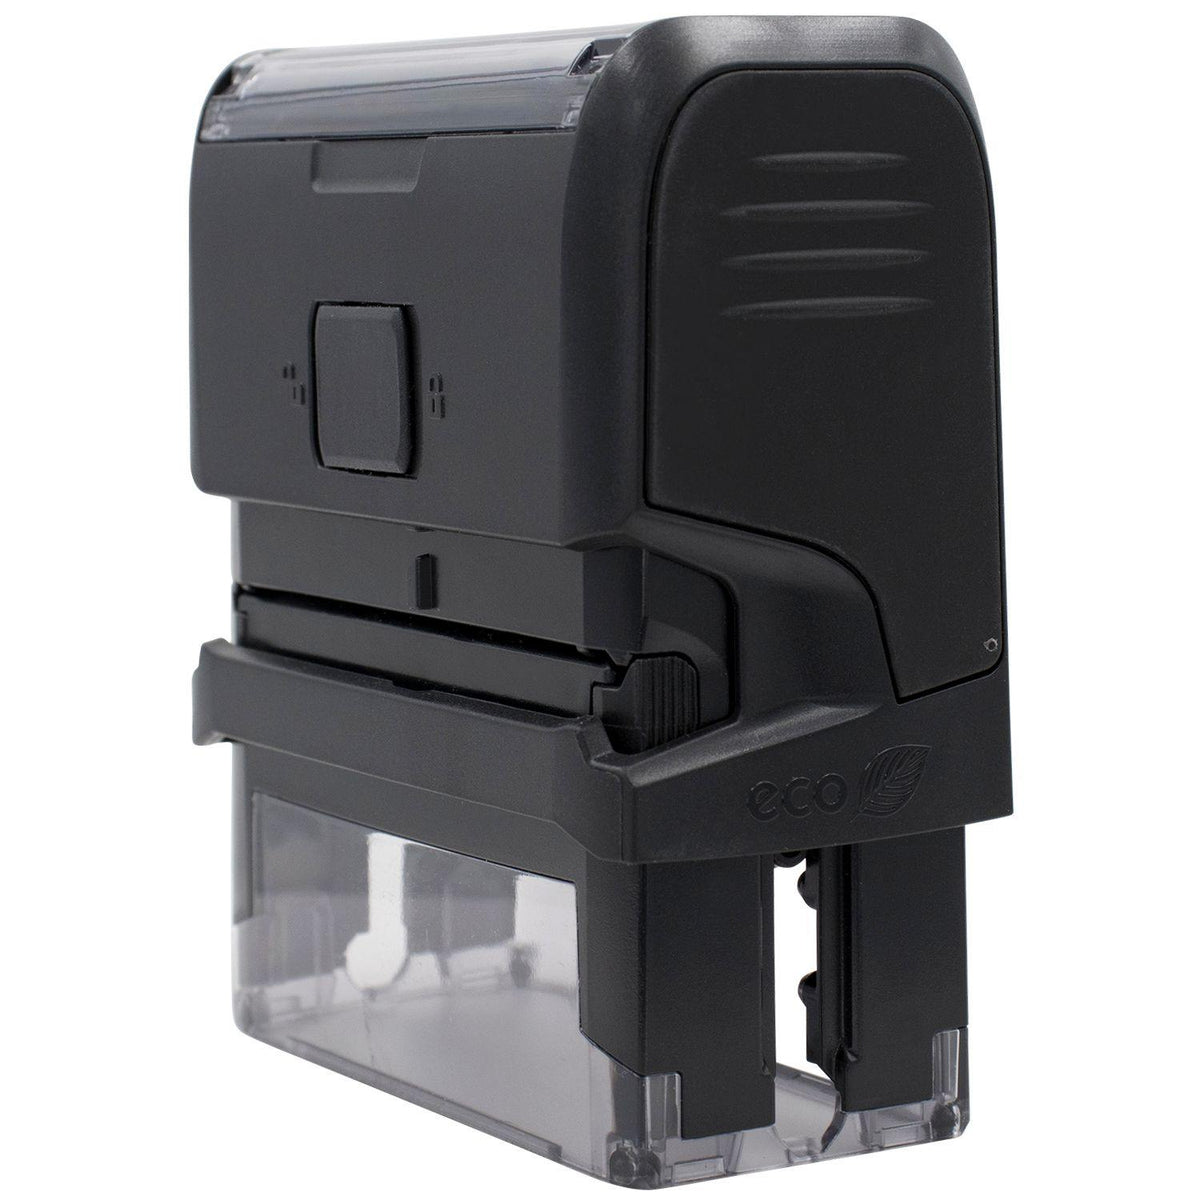 Side View of Large Self Inking Atm Stamp at an Angle